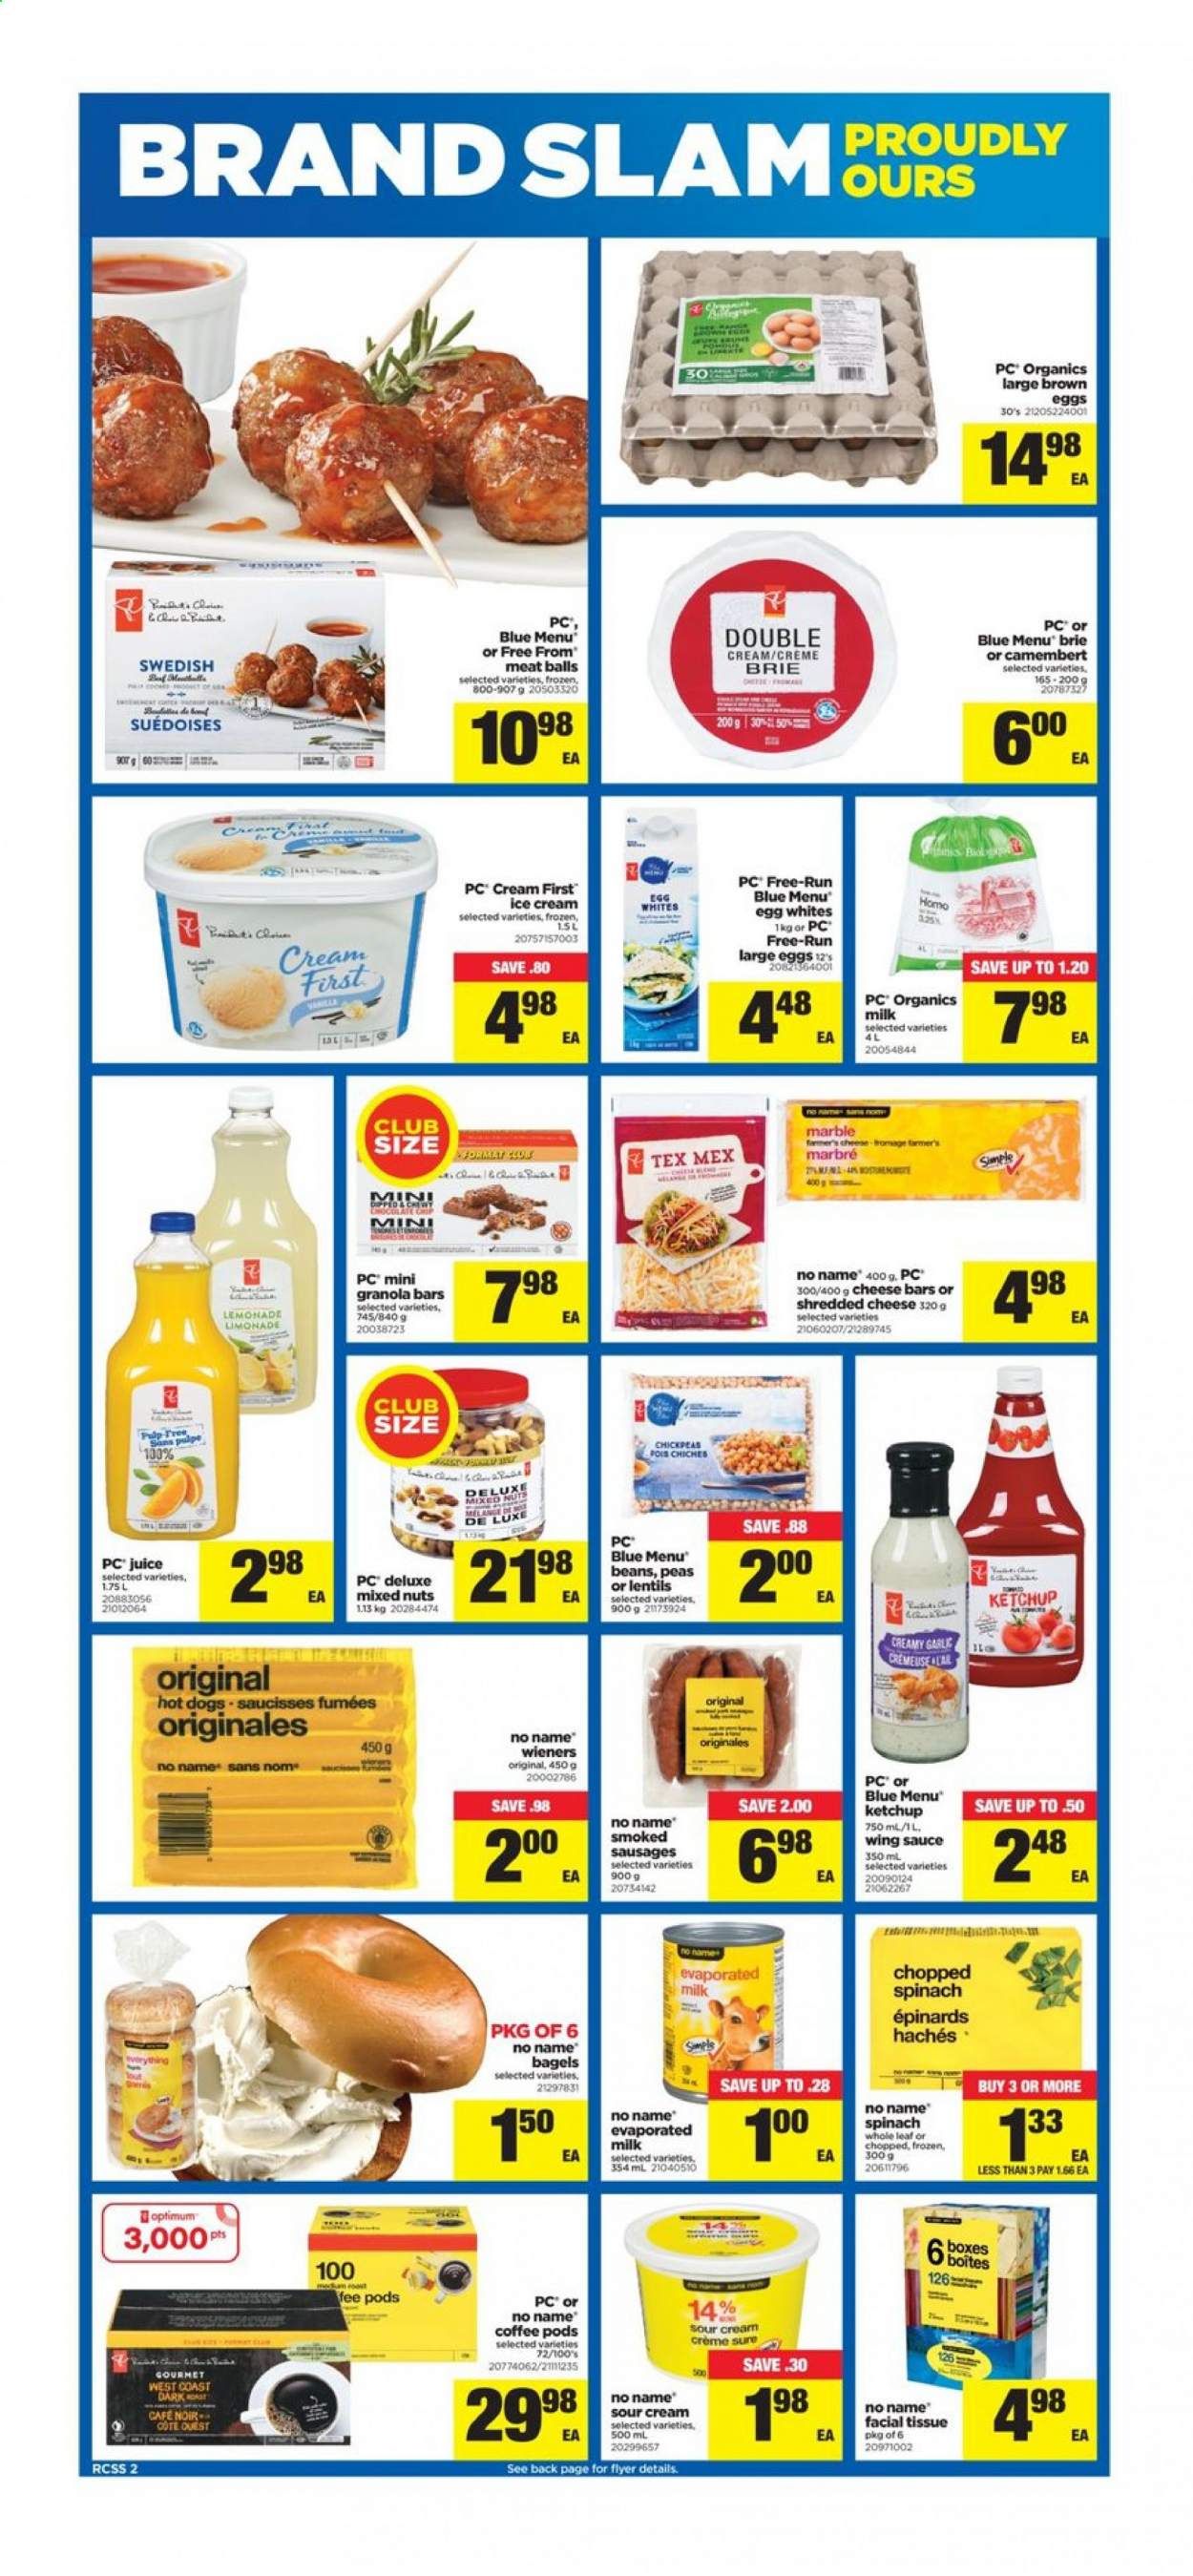 thumbnail - Real Canadian Superstore Flyer - January 21, 2021 - January 27, 2021 - Sales products - bagels, garlic, spinach, peas, No Name, hot dog, sauce, sausage, shredded cheese, brie, evaporated milk, organic milk, large eggs, sour cream, ice cream, lentils, granola bar, chickpeas, wing sauce, mixed nuts, lemonade, juice, coffee pods, tissues, Sure. Page 2.